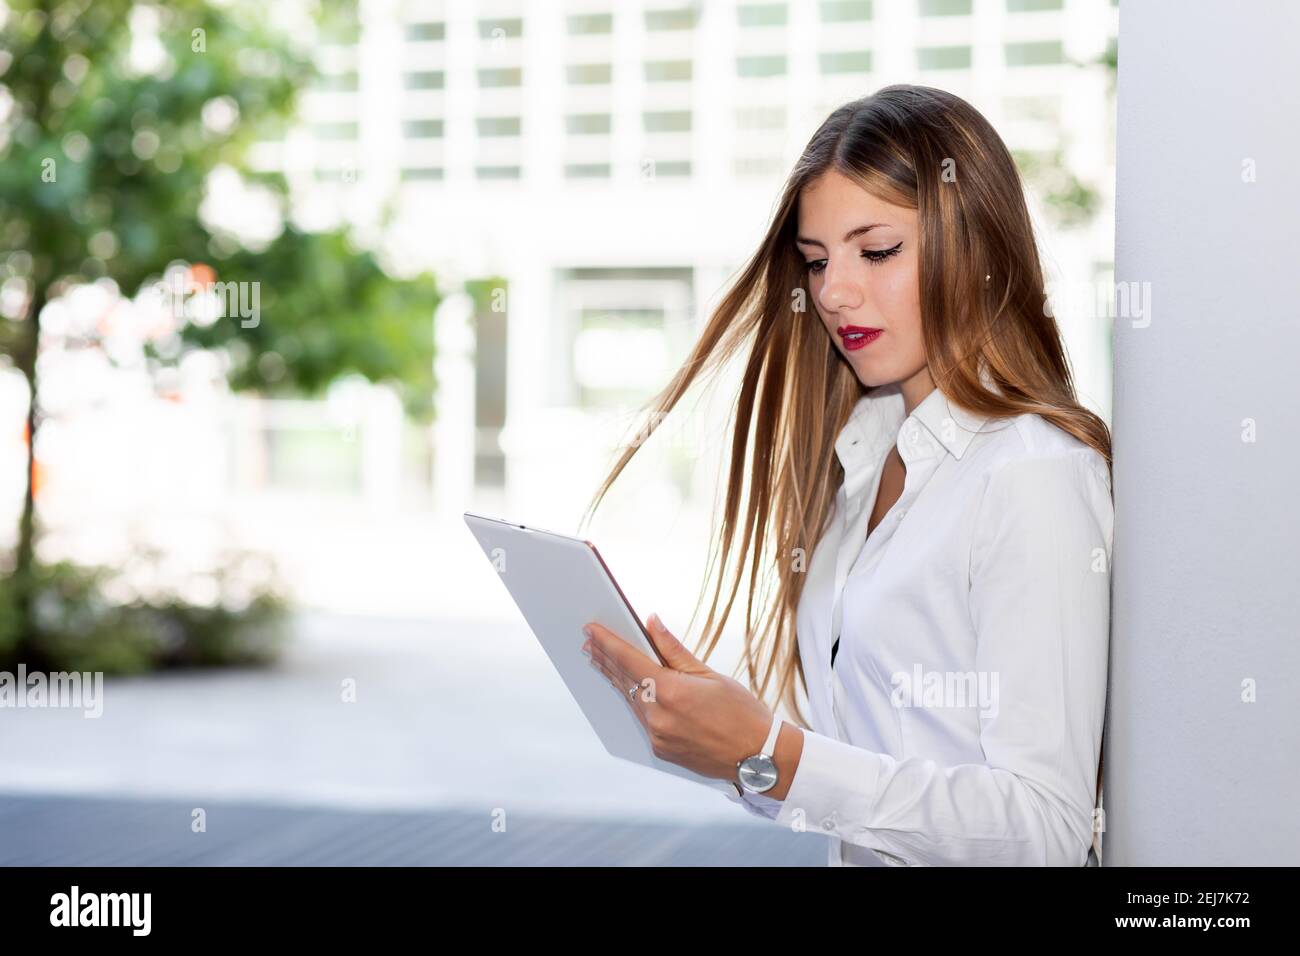 Smiling businesswoman using a digital tablet outdoor Banque D'Images